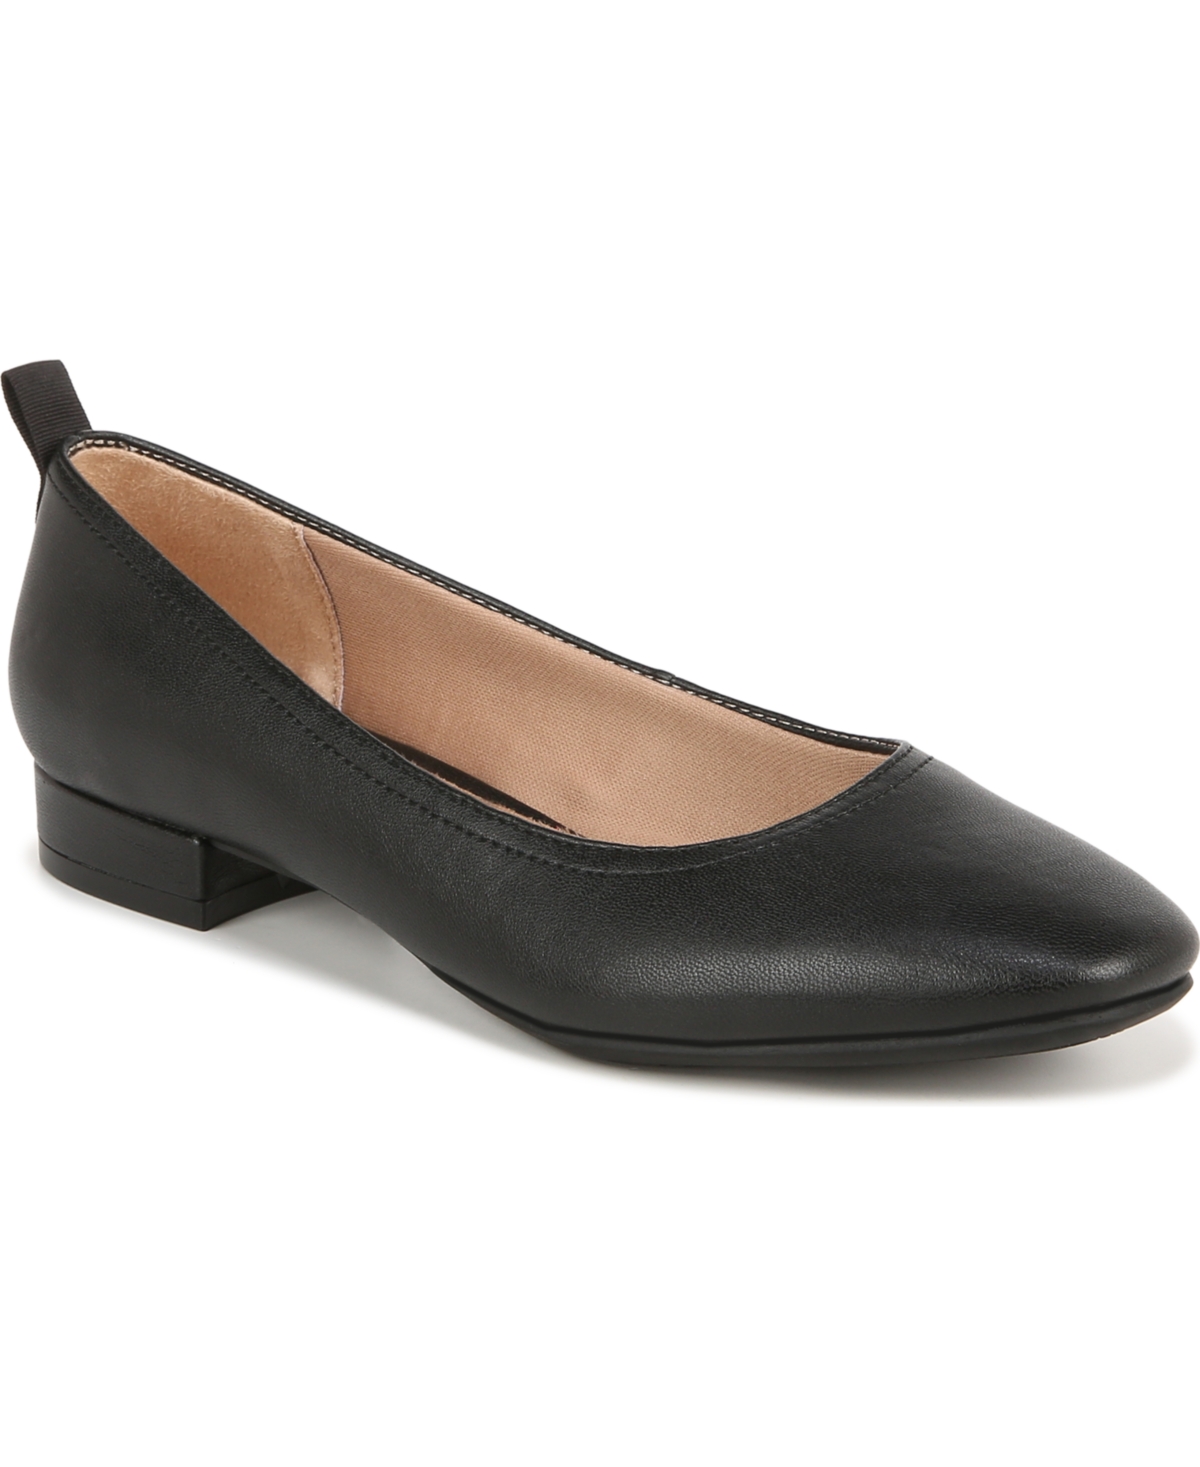 Lifestride Cameo Flats In Black Faux Leather